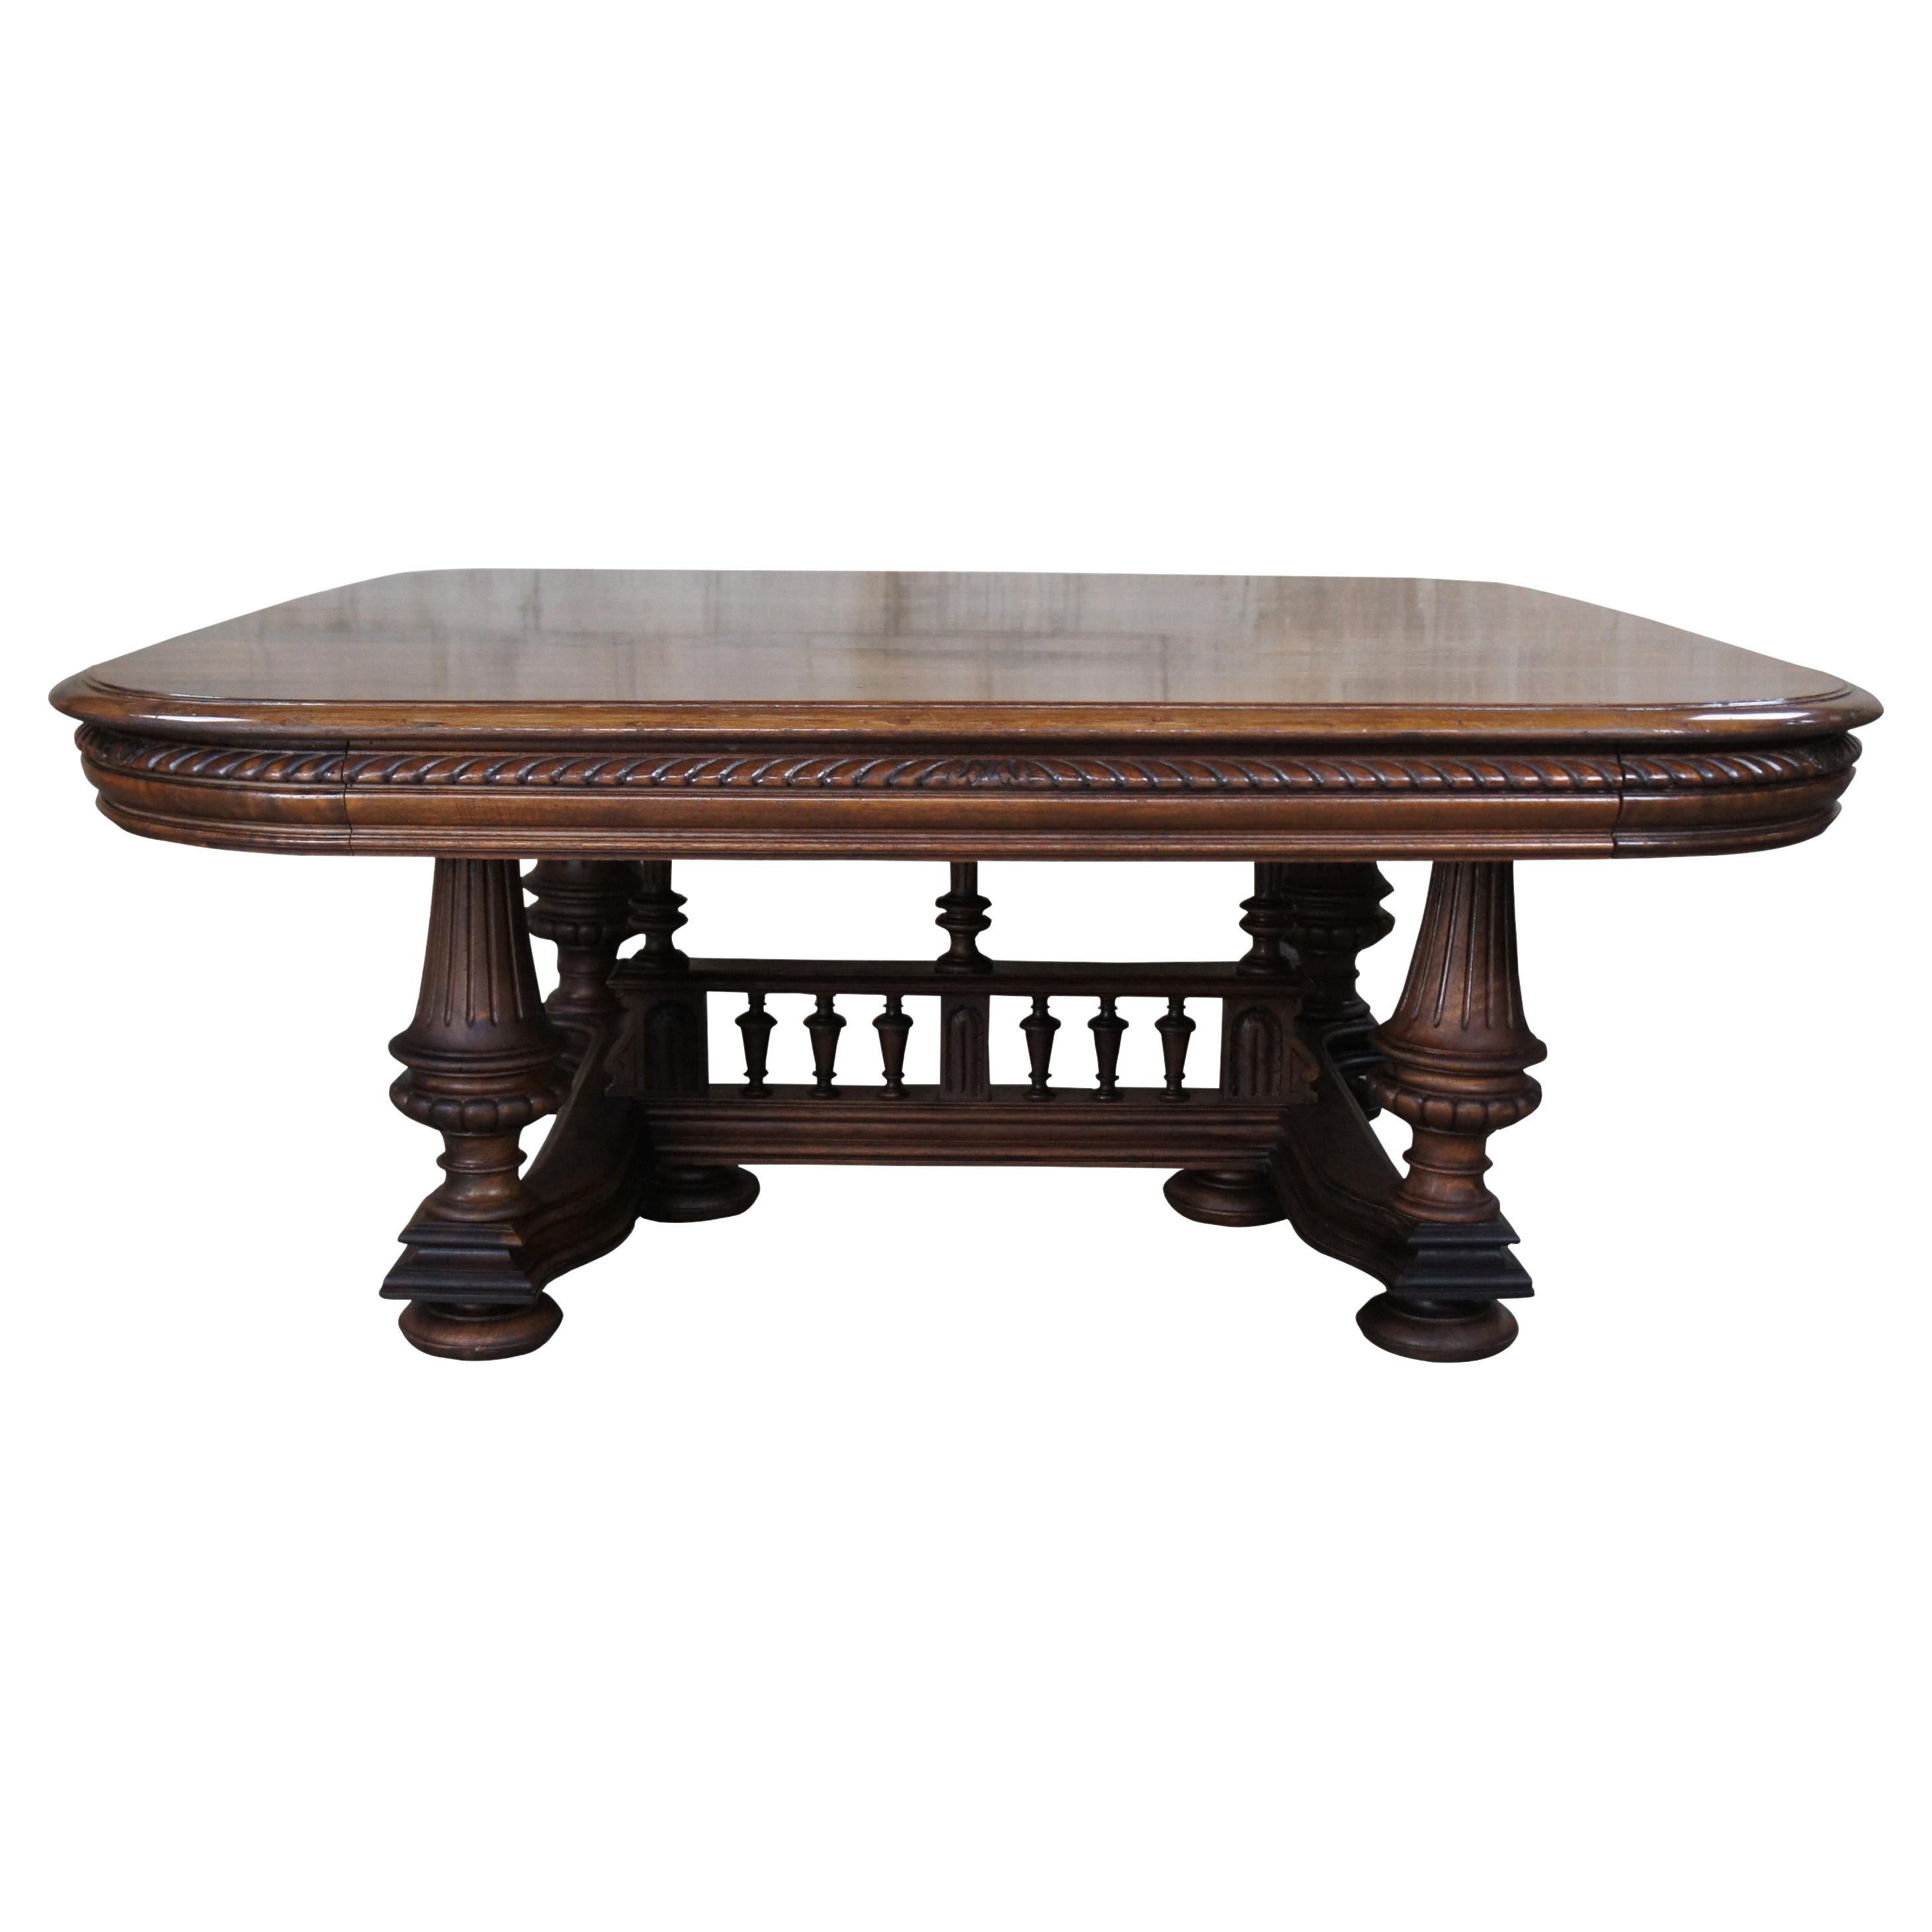 Antique French Renaissance Revival Carved Walnut Coffee Cocktail Table